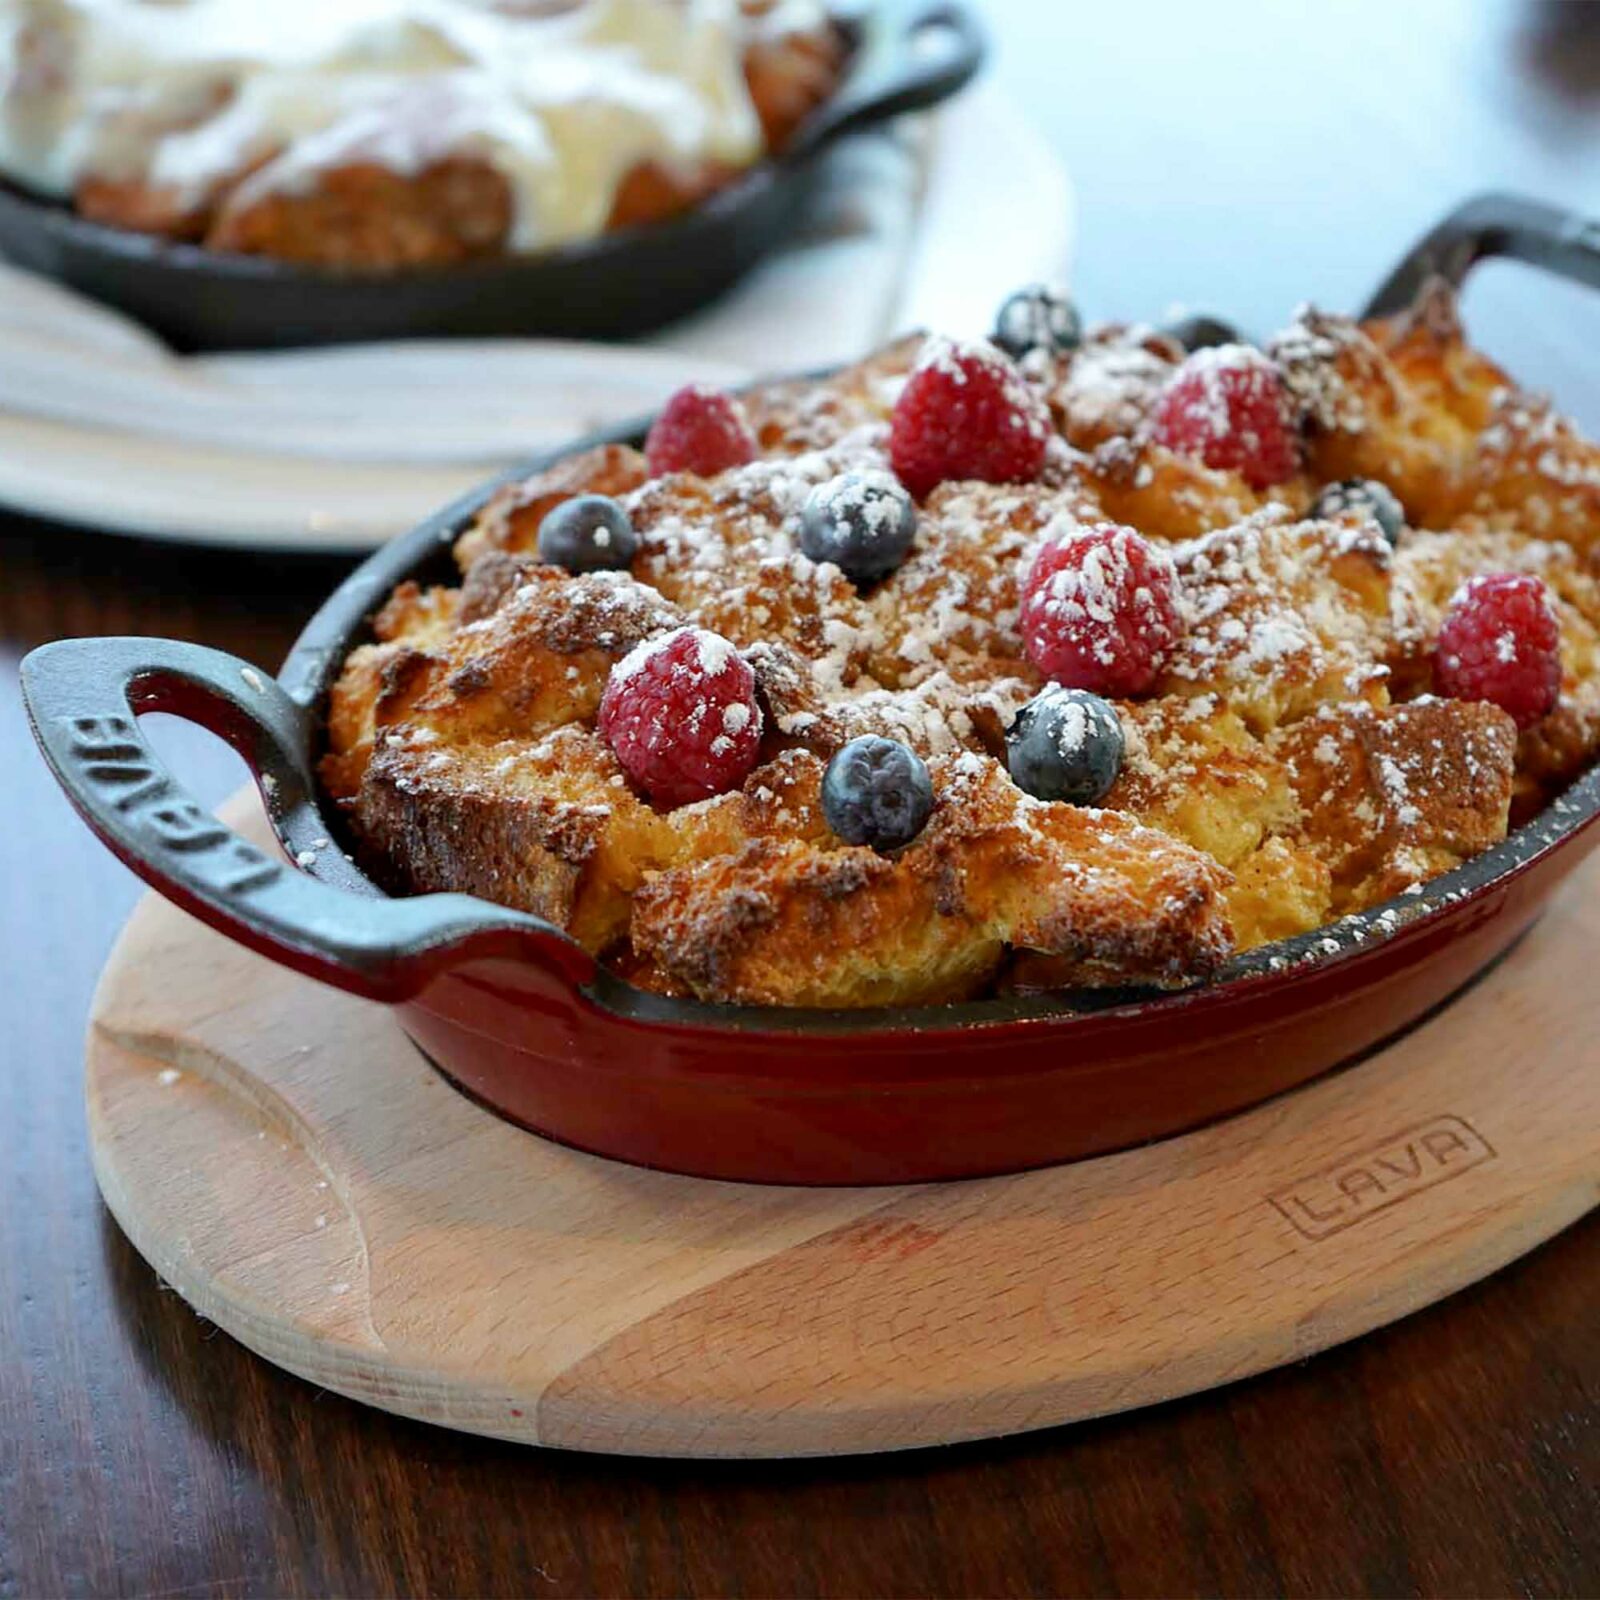 Treat yourself to Skillet French Toast at Weekend Brunch at select Burtons Grill locations.